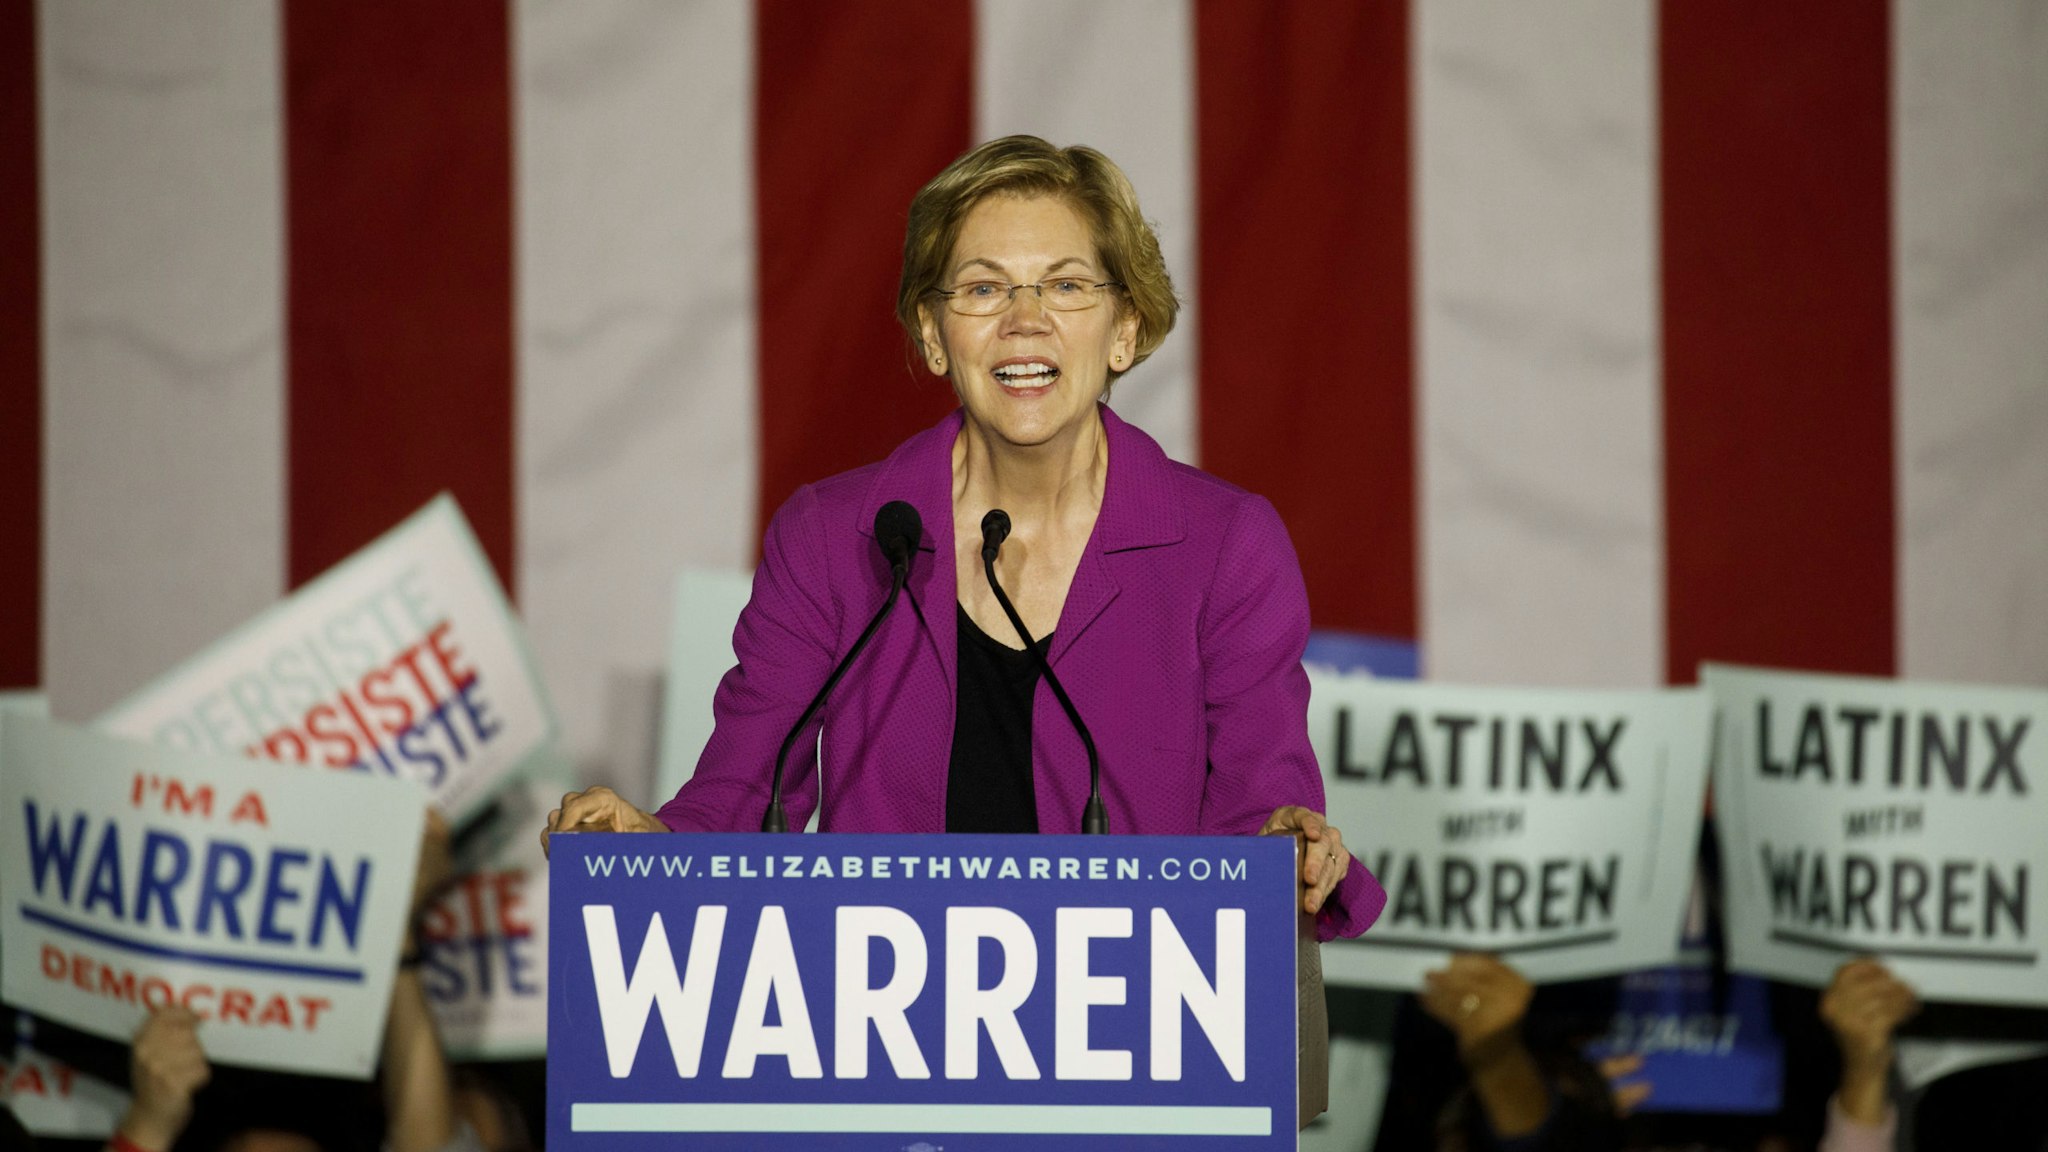 Senator Elizabeth Warren, a Democrat from Massachusetts and 2020 presidential candidate, speaks during a campaign event at East Los Angeles Community College in Monterey Park, California, U.S., on Monday, March 2, 2020. Joe Biden is consolidating support for his Democratic presidential campaign as centrists line up behind him to effectively try to block Bernie Sanders from winning the party's nomination. Photographer: Patrick T. Fallon/Bloomberg via Getty Images